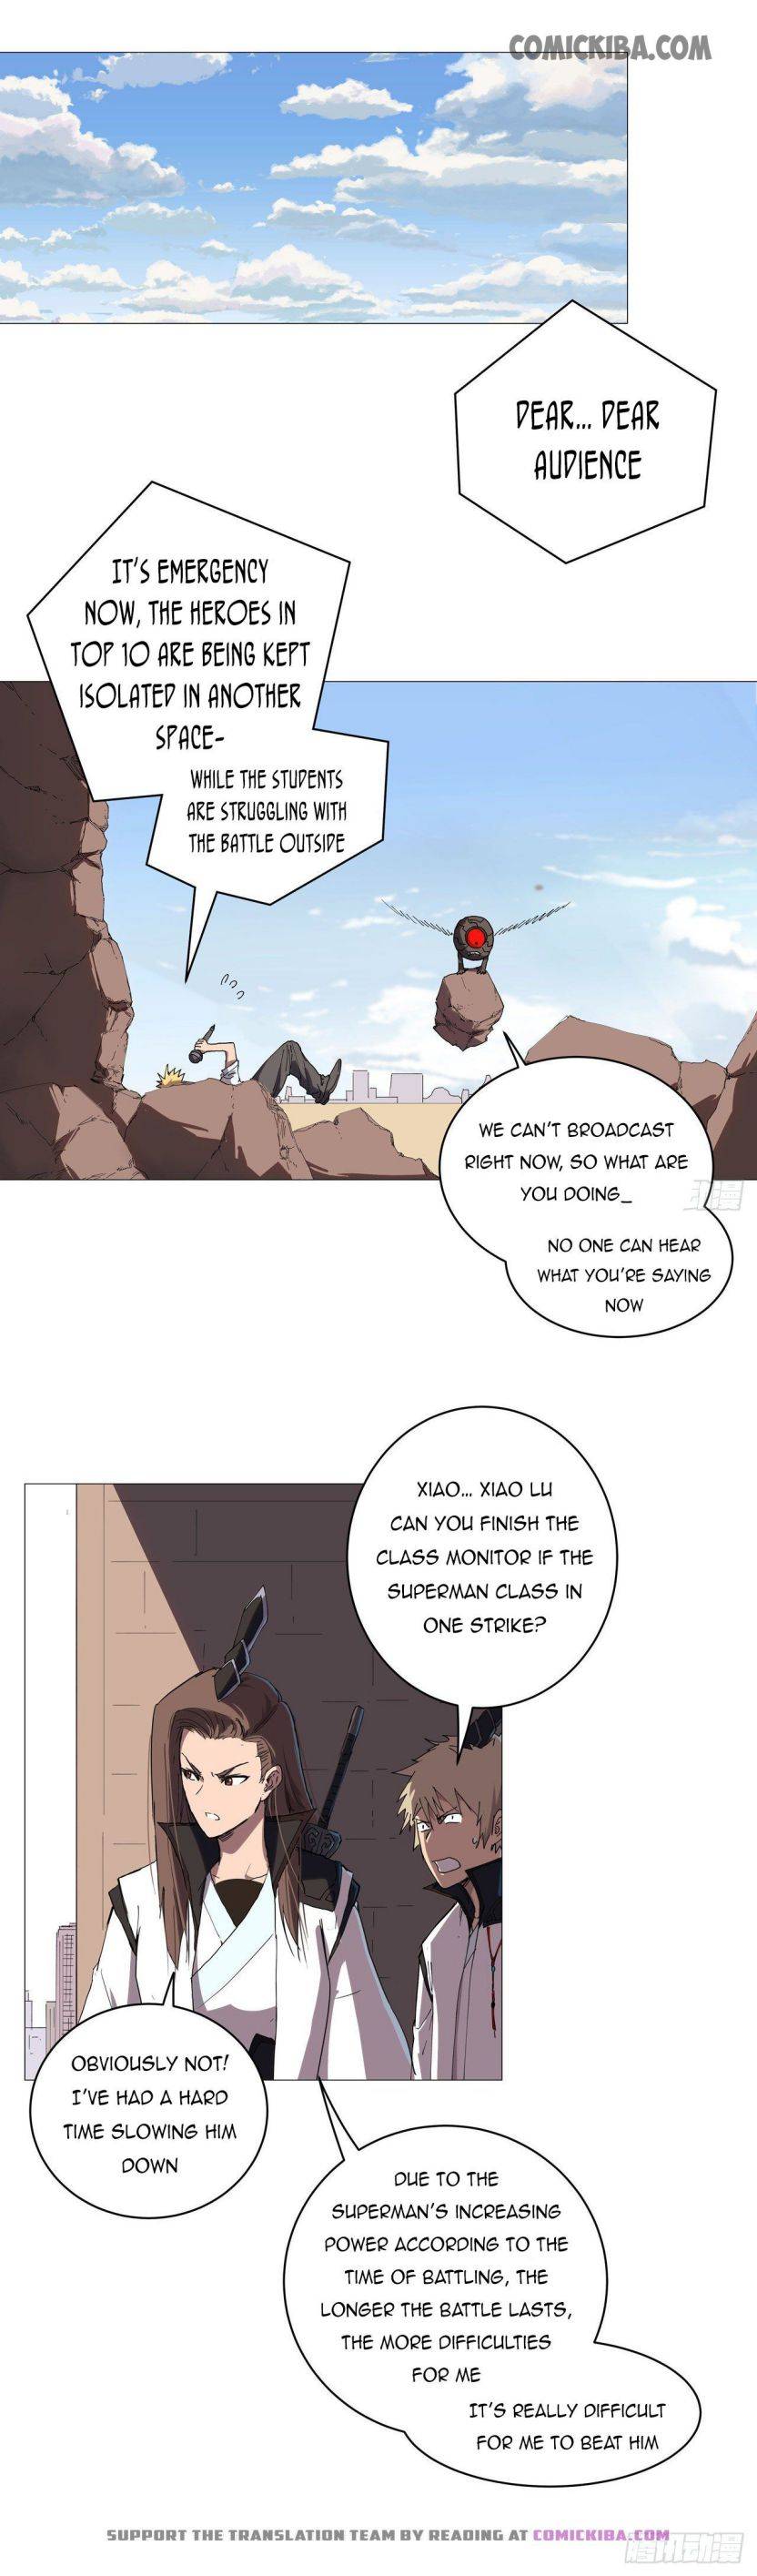 Cultivator Against Hero Society - Page 2